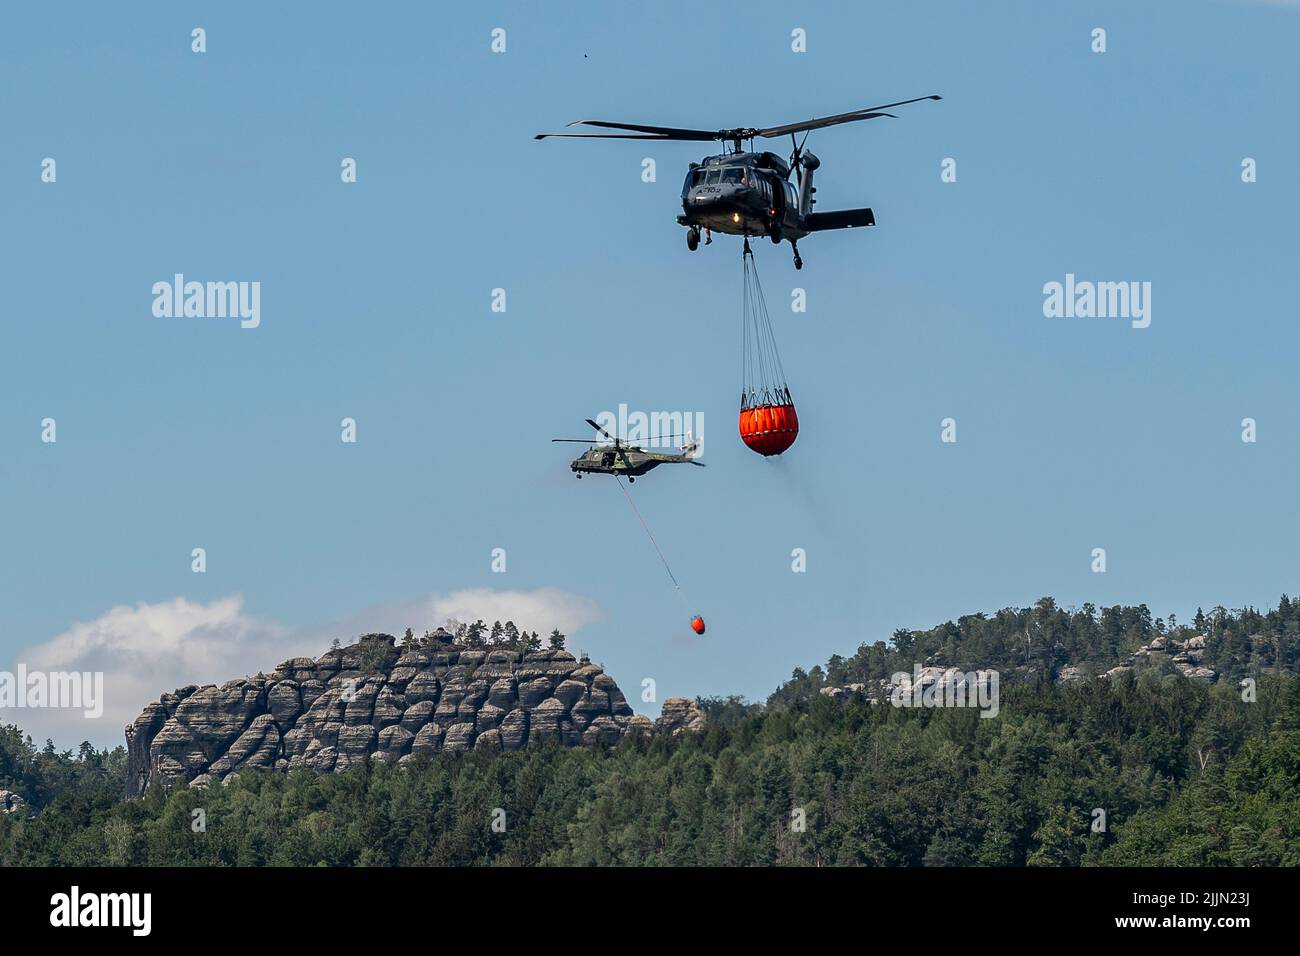 Hrensko, Czech Republic. 27th July, 2022. Helicopters with bambi buckets extinguish large forest fire in the Ceske Svycarsko (Czech Switzerland) National Park, Hrensko, Czech Republic, on July 27, 2022. The fire in the national park has been spreading for the fourth day in a row. Credit: Ondrej Hajek/CTK Photo/Alamy Live News Stock Photo